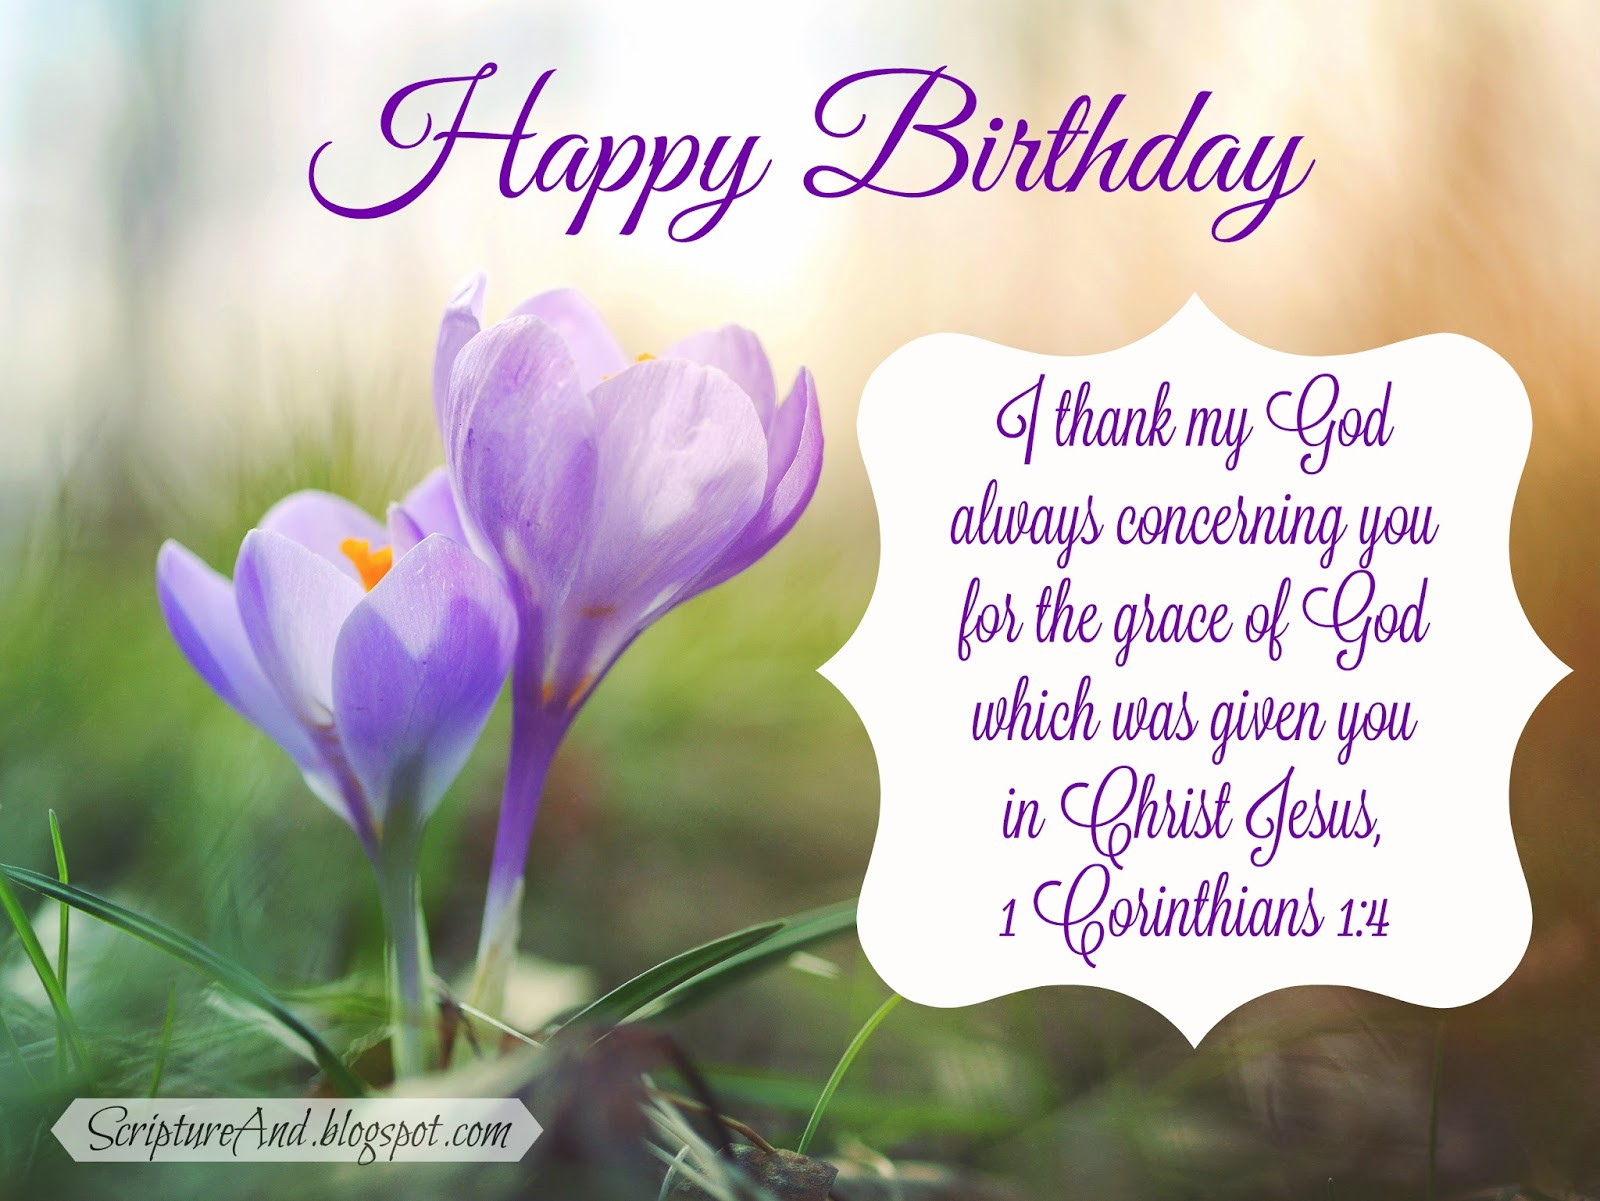 Happy Birthday Christian Quote
 Scripture and Free Birthday with Bible Verses